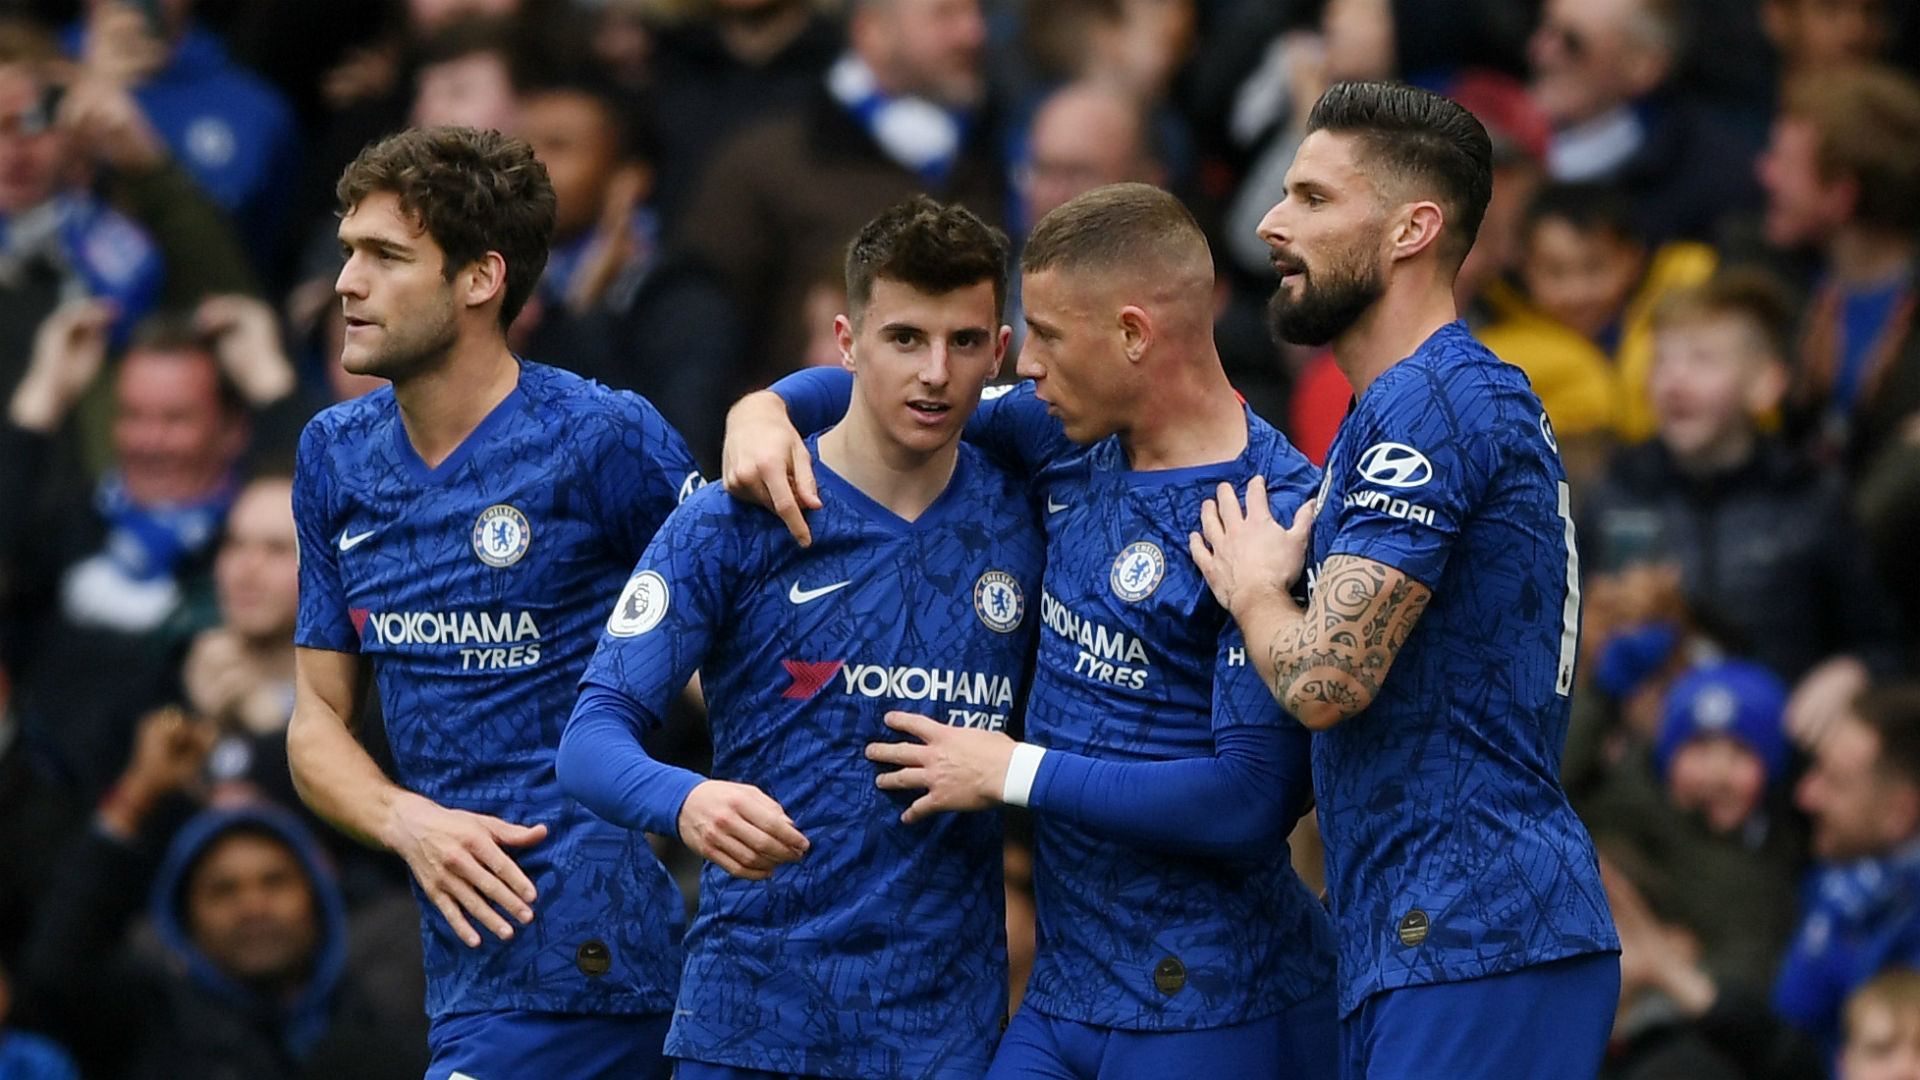 Chelsea only takes pay cut if money goes to nhs - Bóng Đá